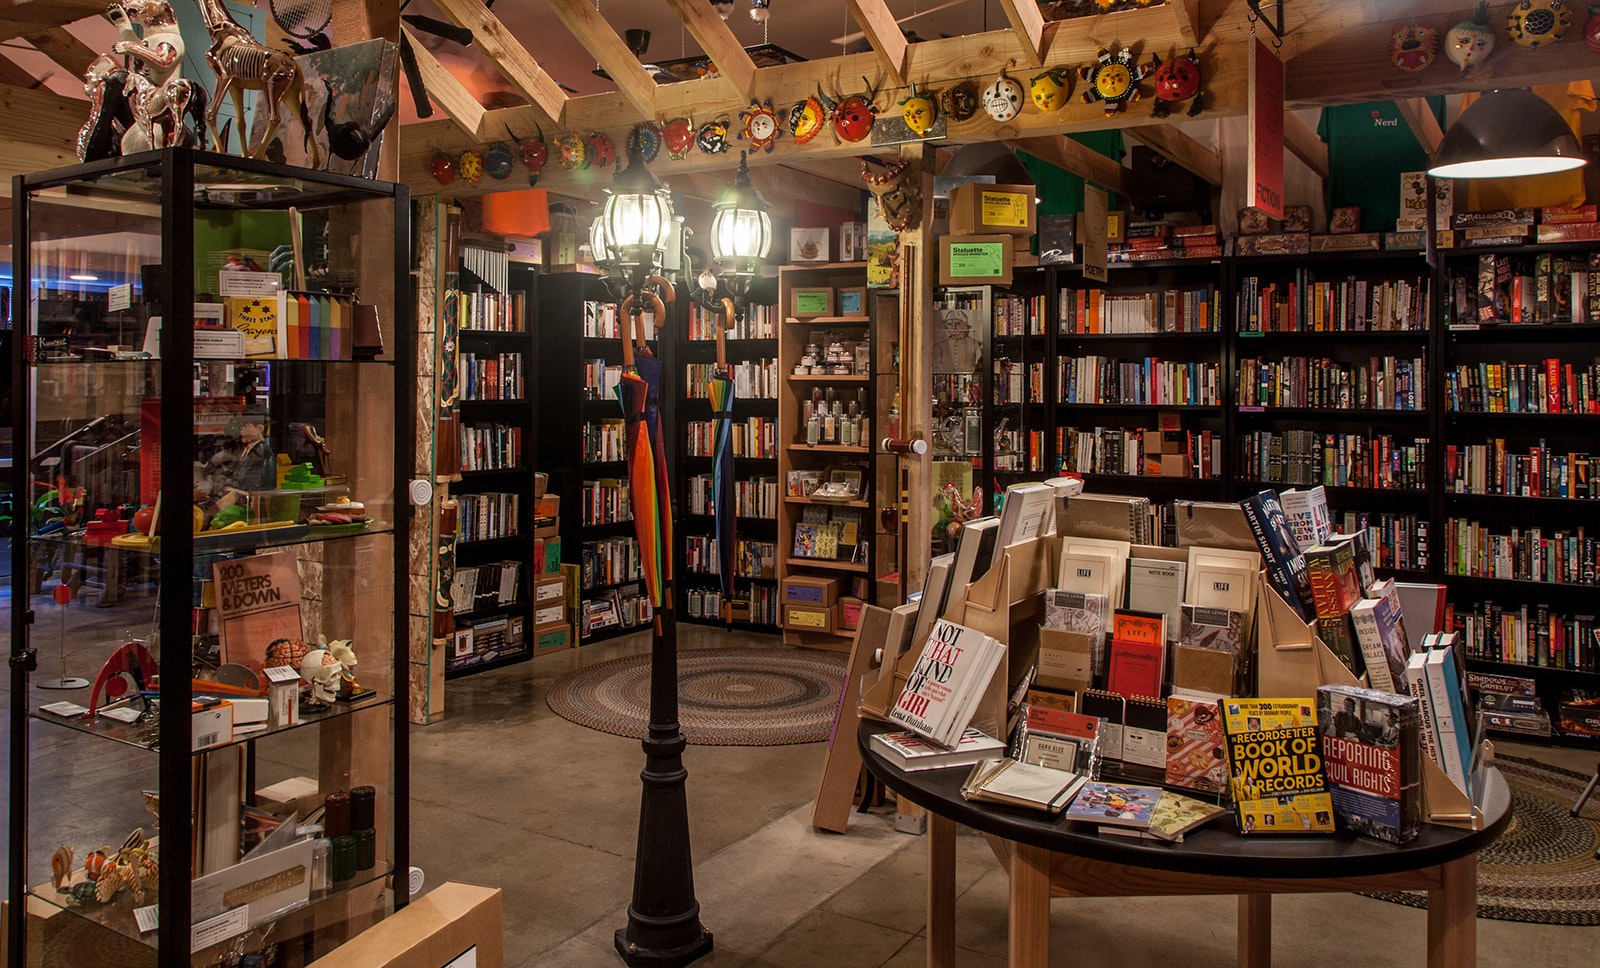 interior shot of bookshop with loaded bookshelves and lamp post